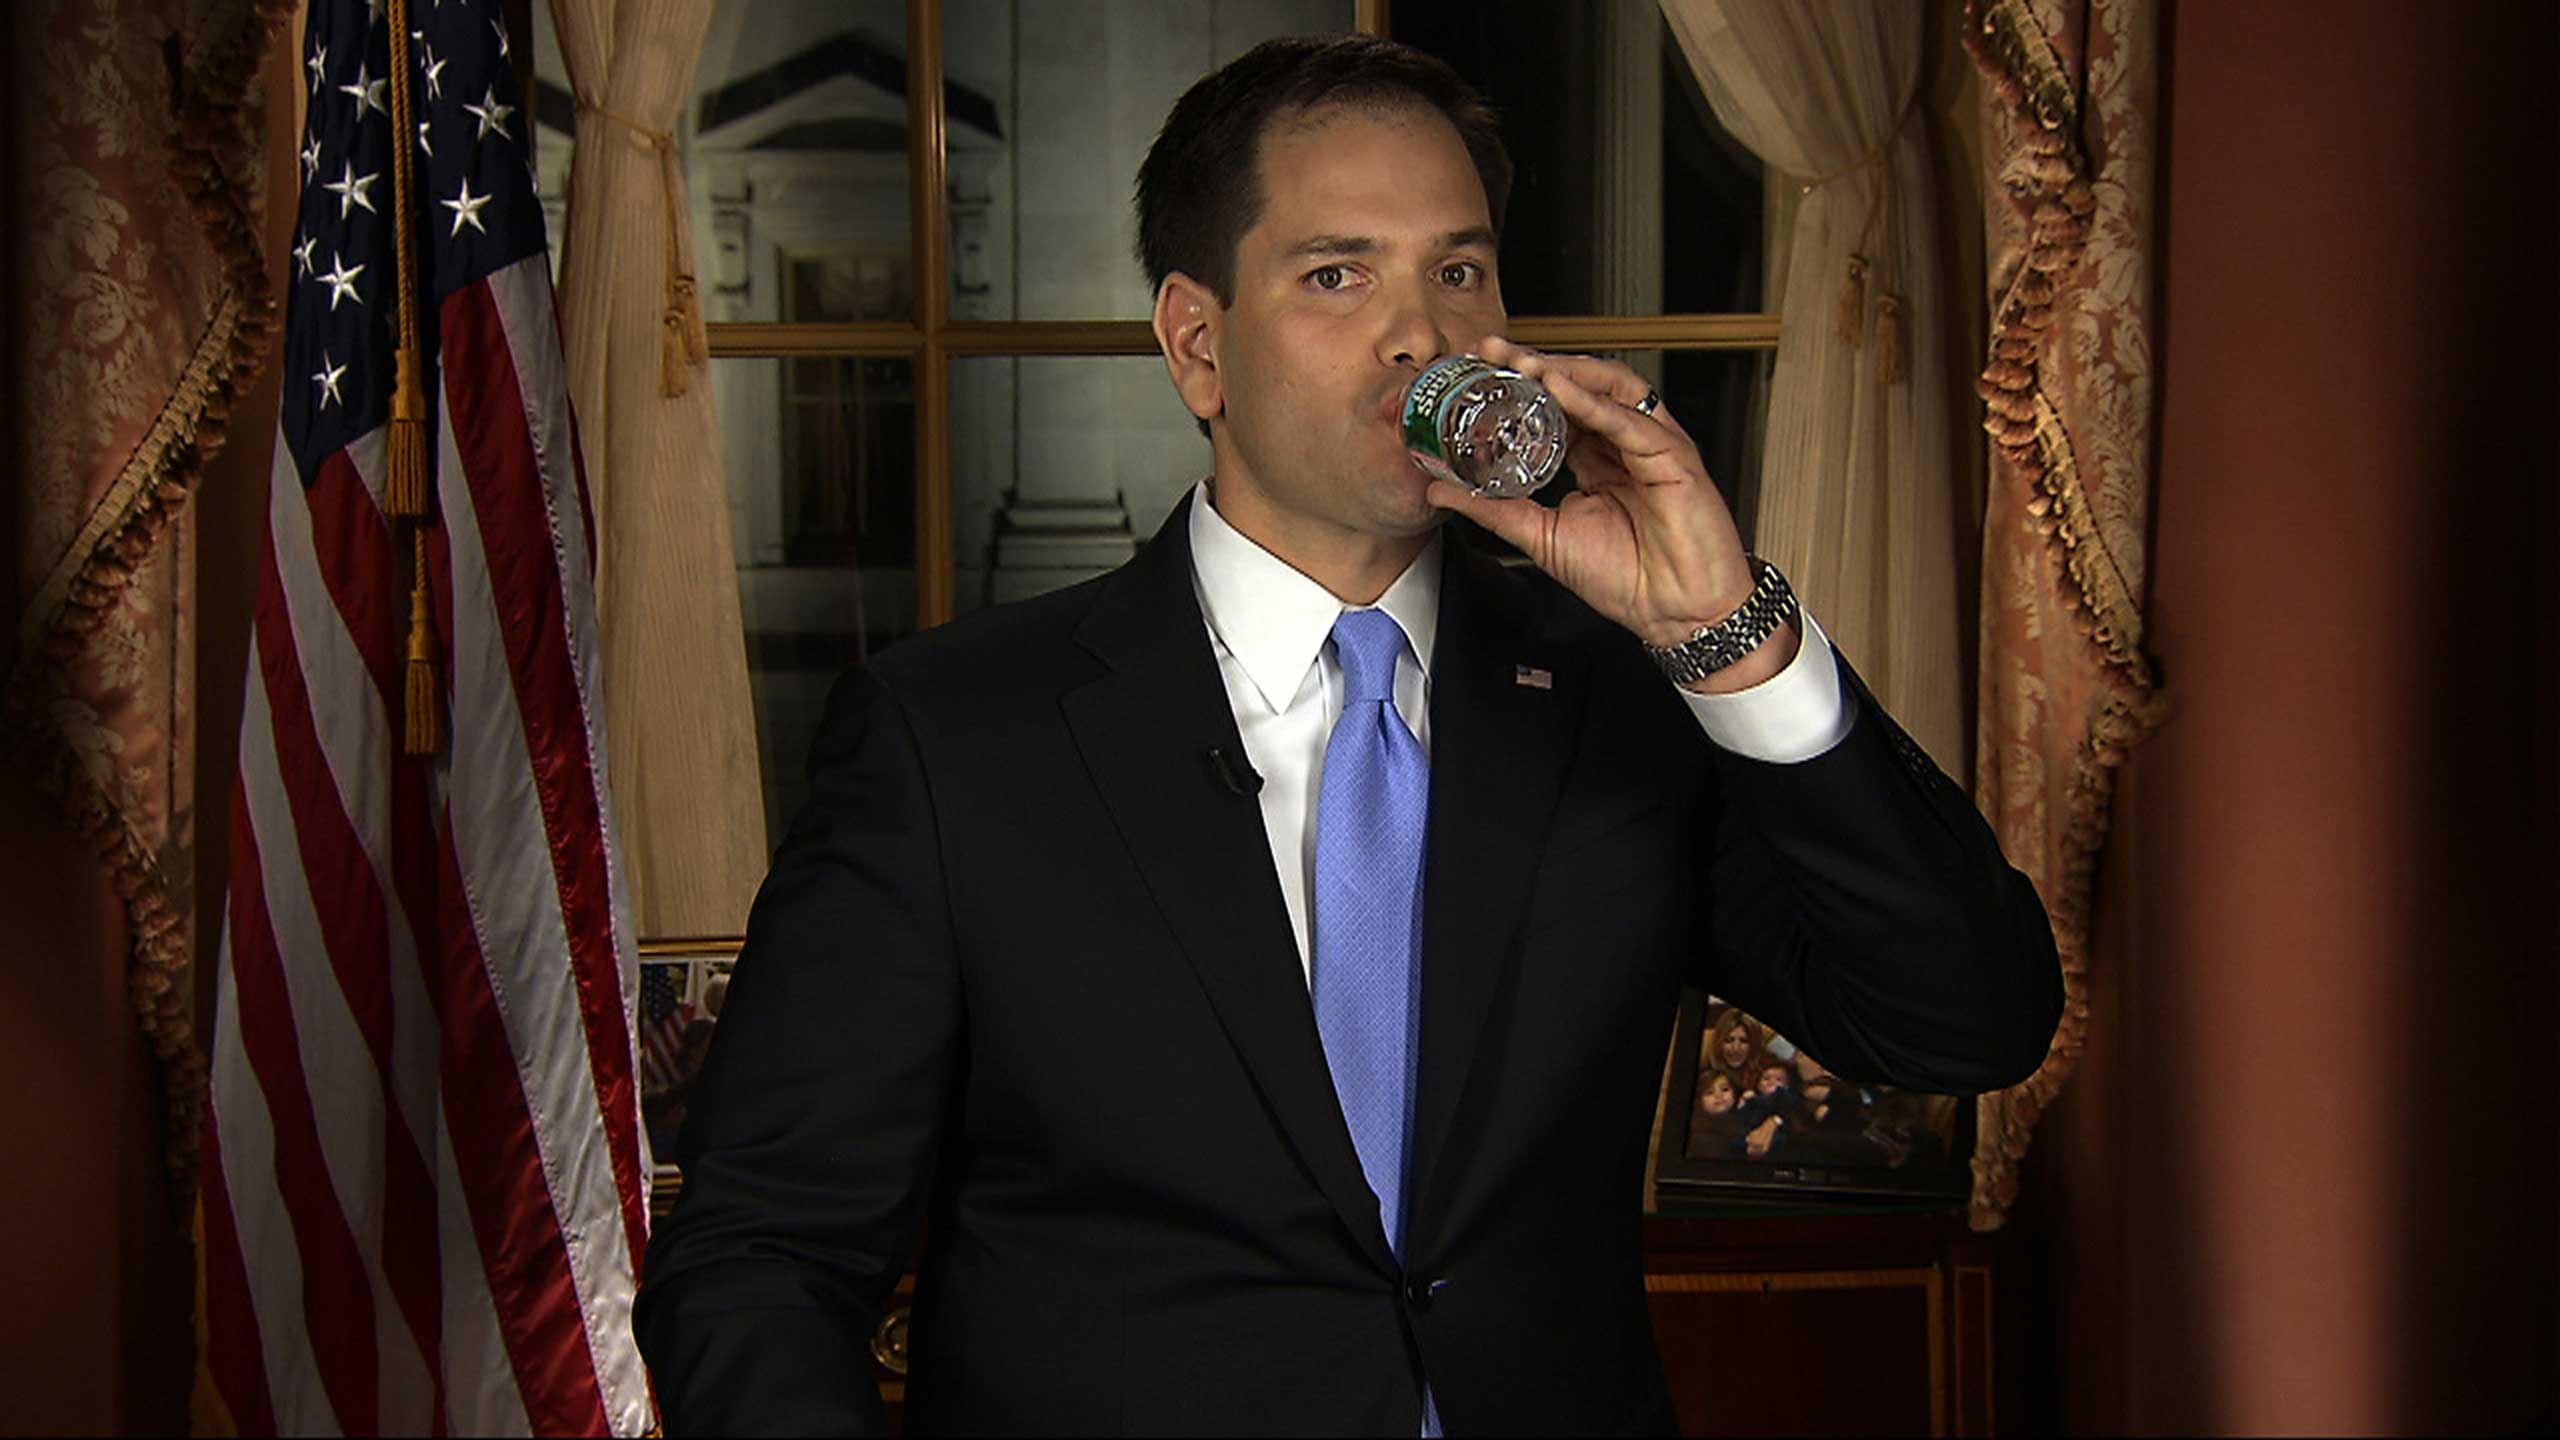 Sen. Marco Rubio gave the response to Obama in 2013. His awkward drink of water midway through was much ridiculed.